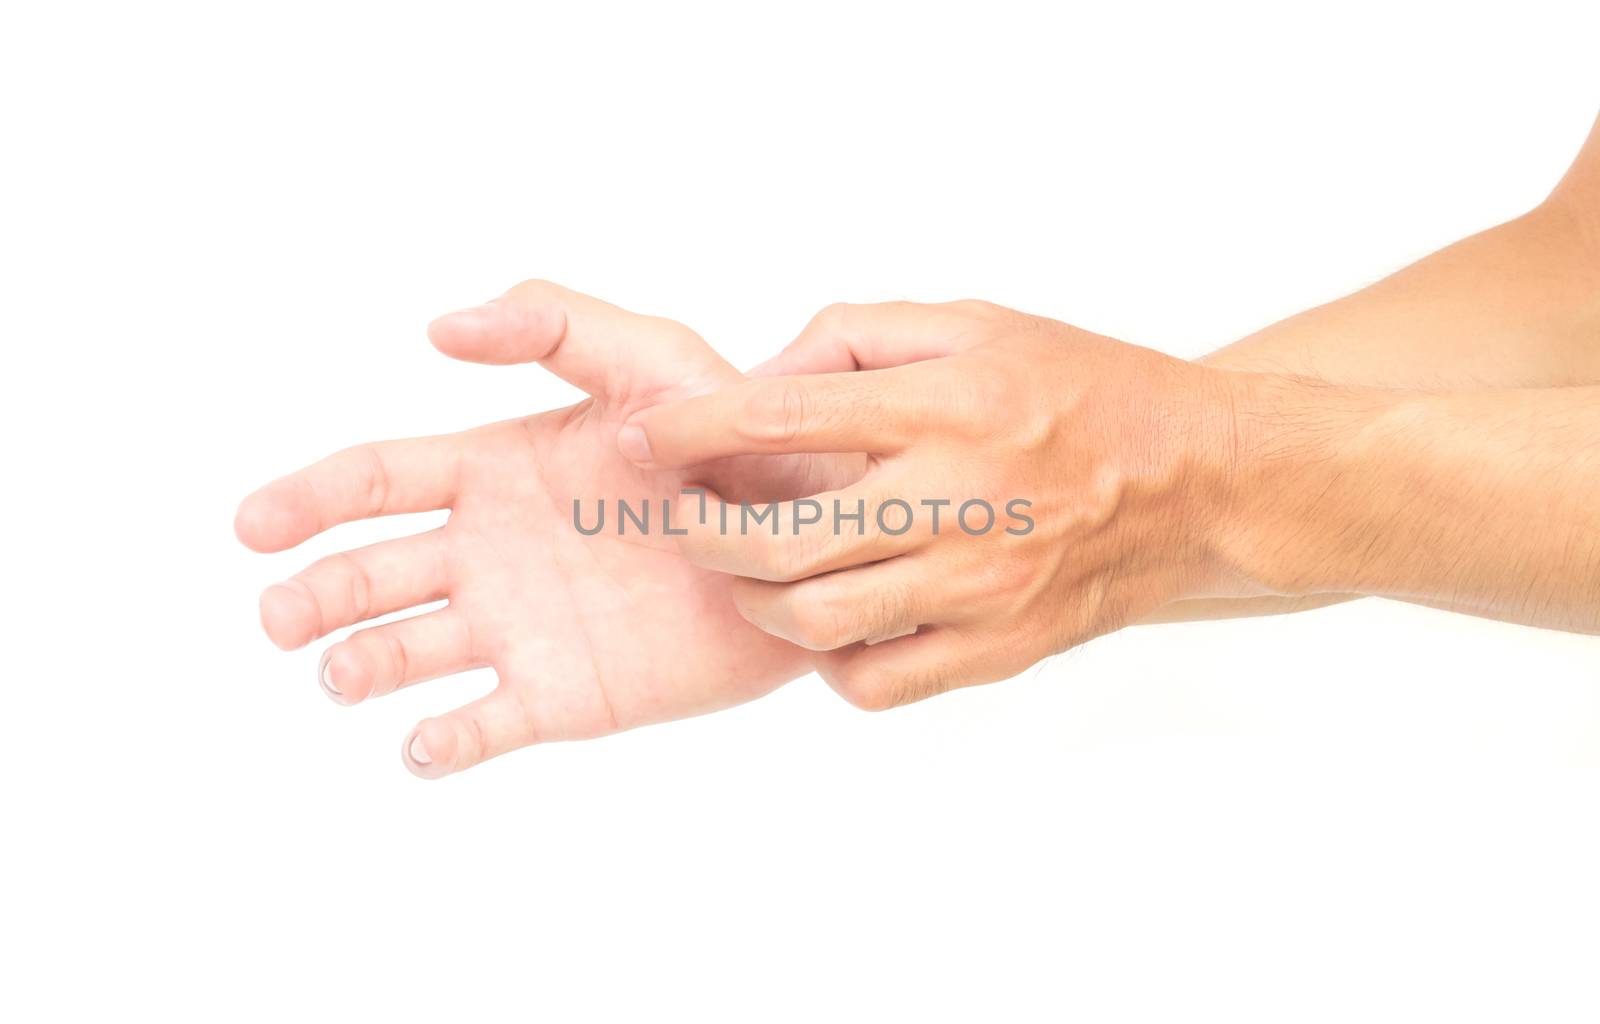 Man hand scratching hand on white background for healthy concept